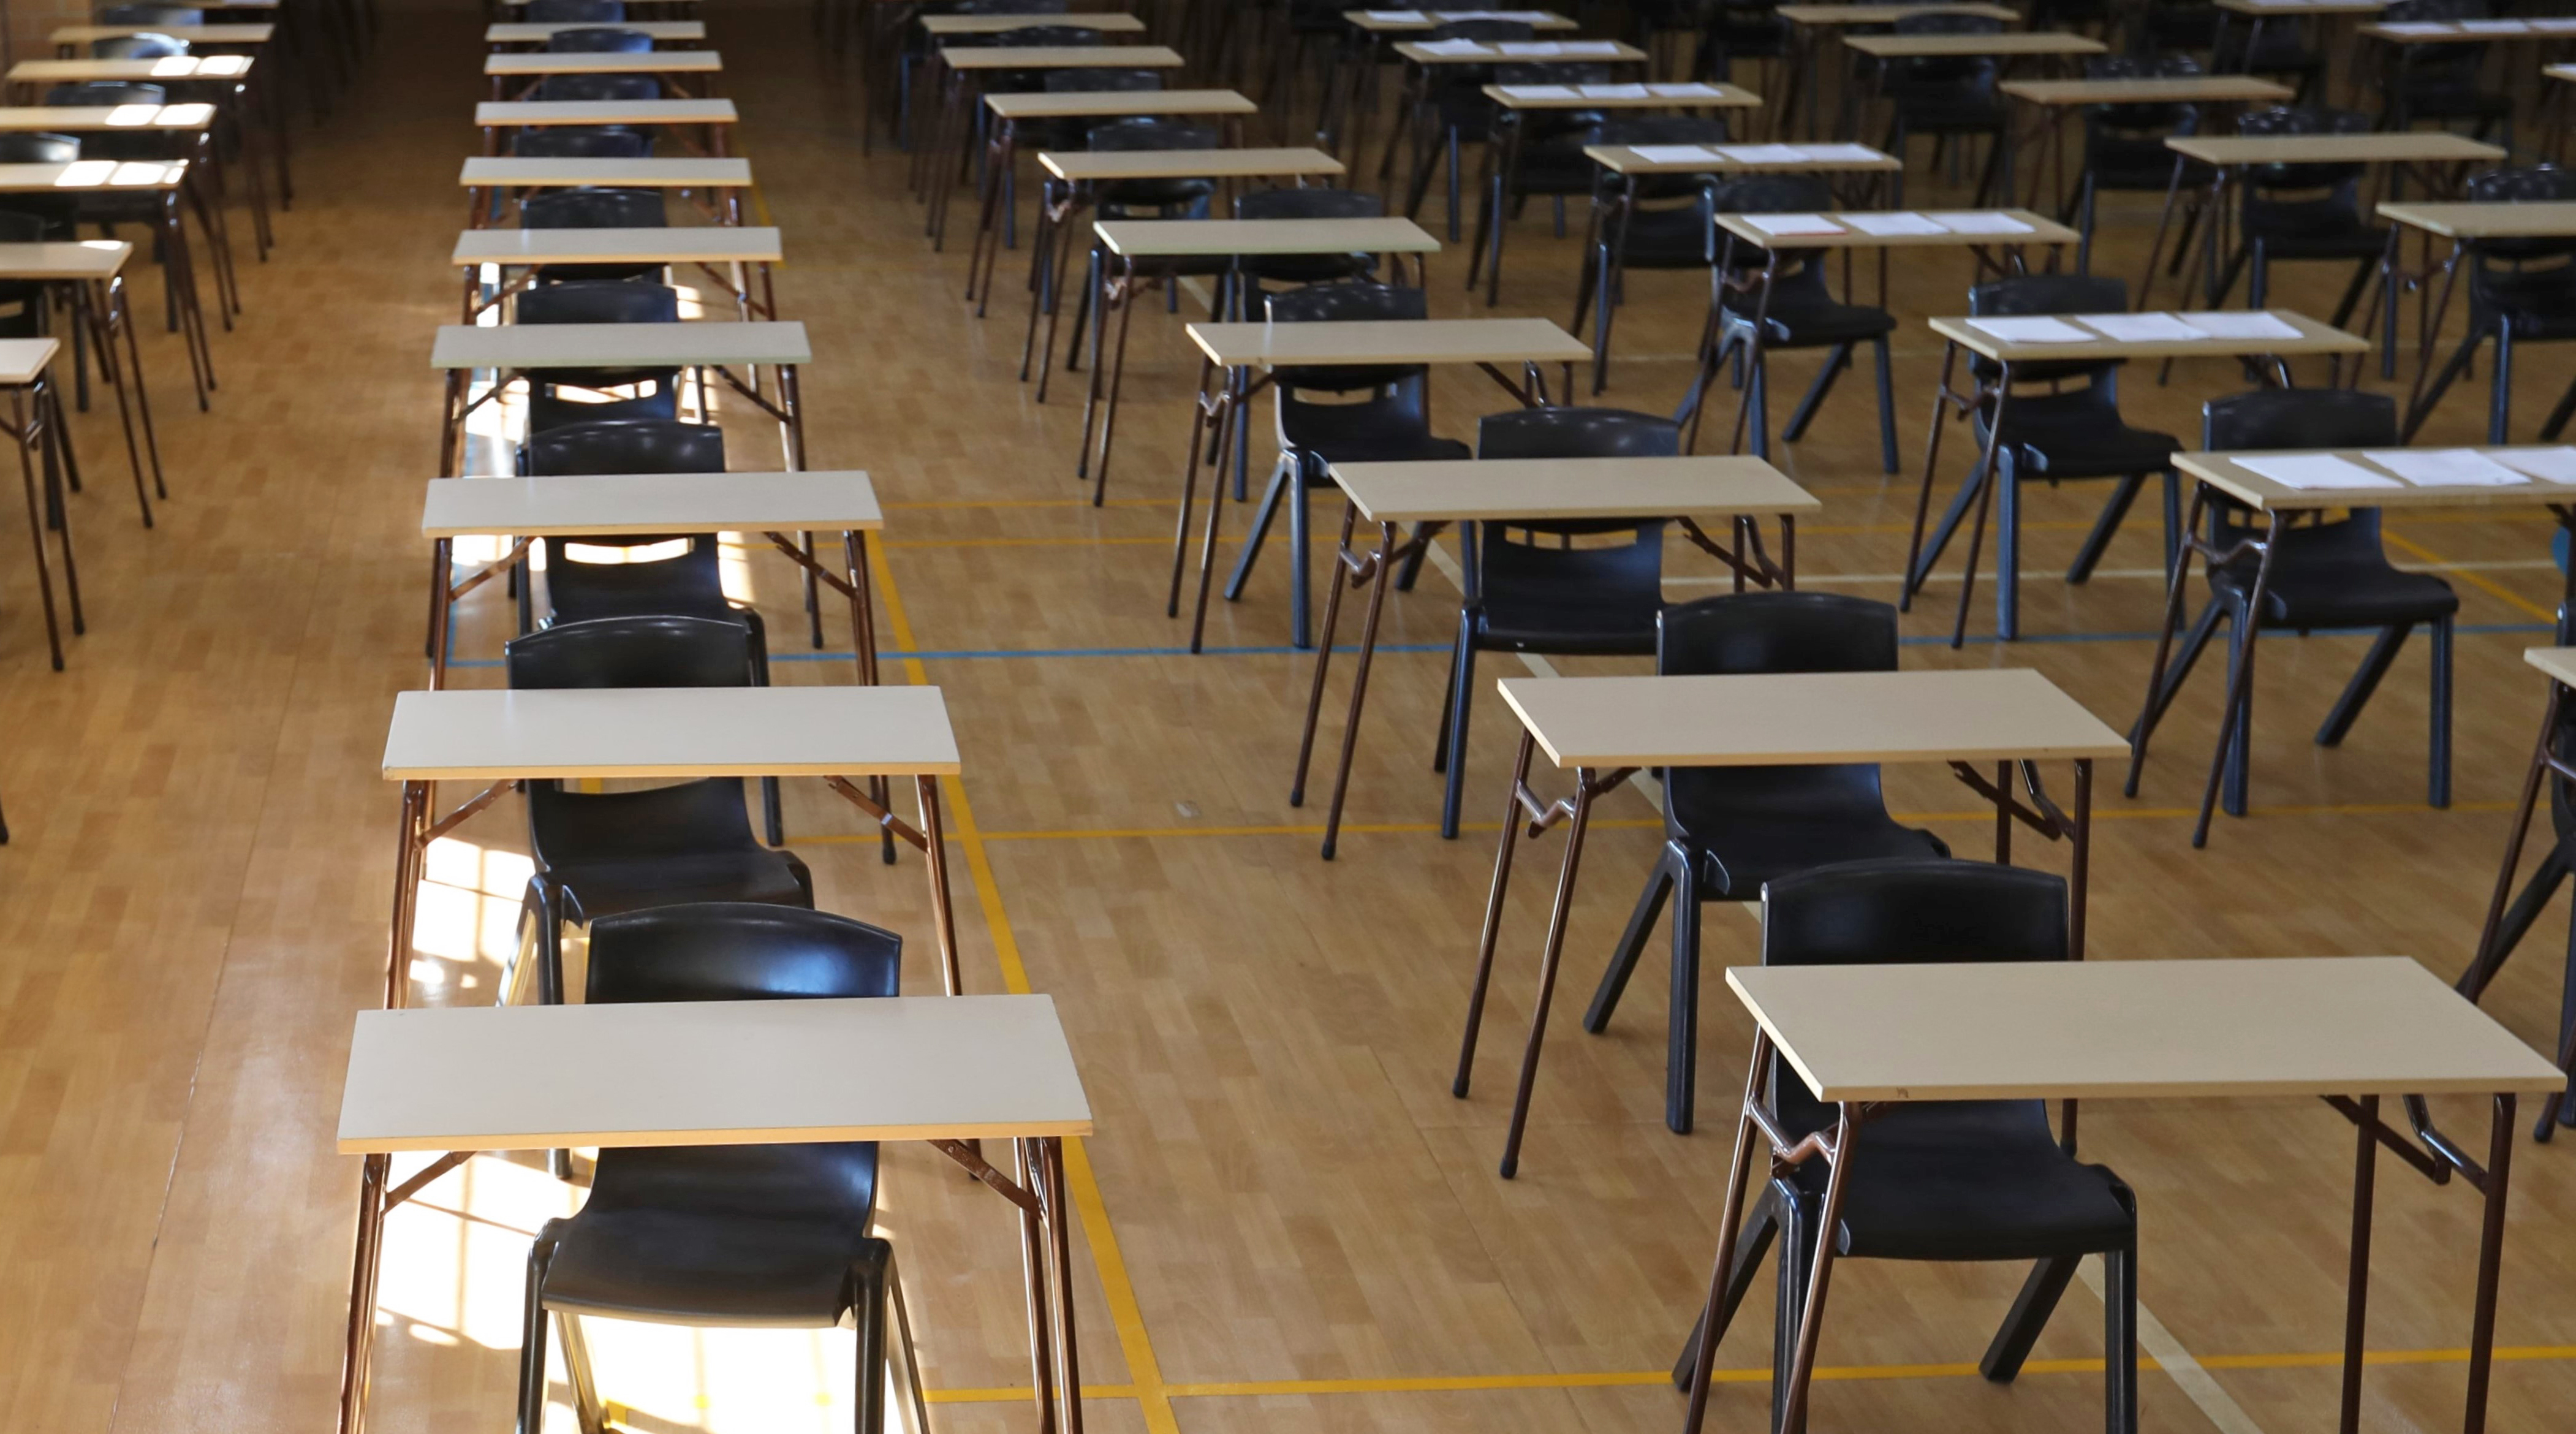 Pens down after thousands of NSW students take the English exam